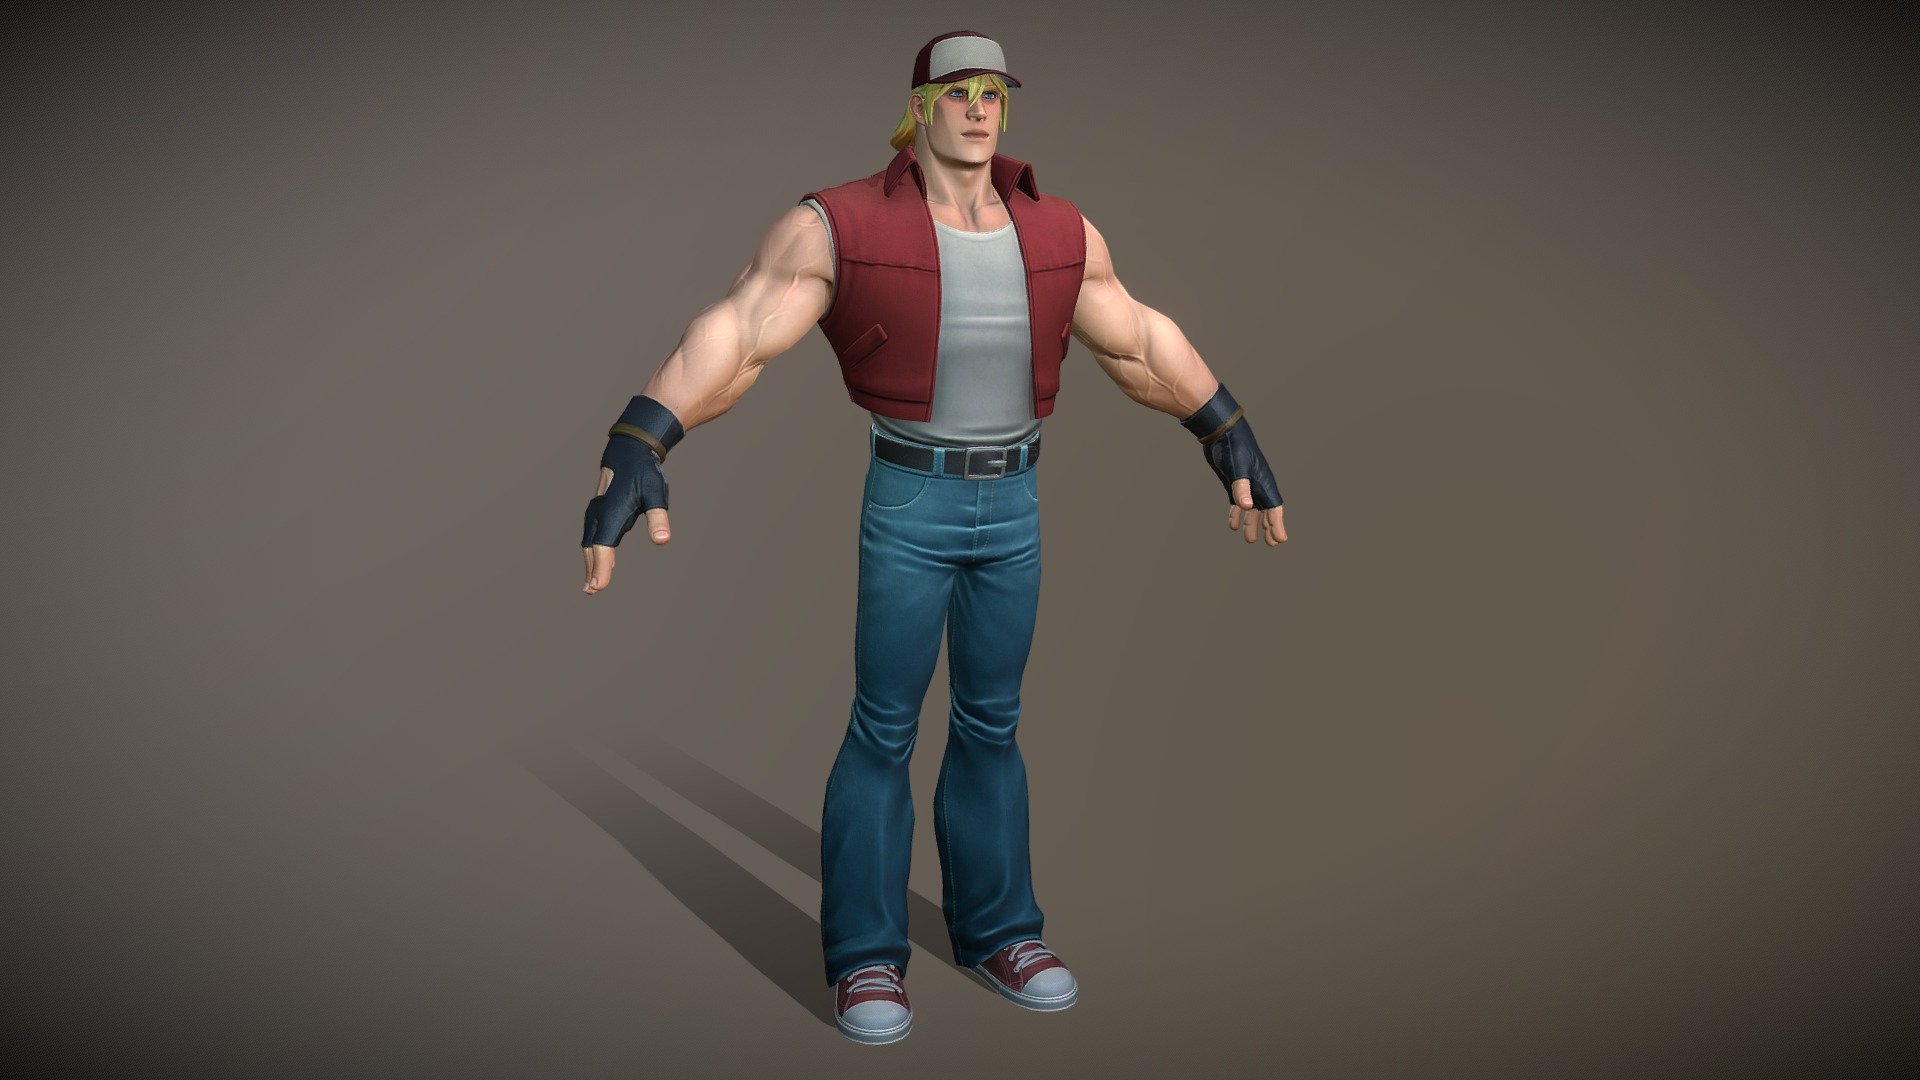 Hello guys! his is the last project I've done for my portfolio. I have lots of good memories from playing Fatal Fury as a teenager, and Terry was one of my favorite characters! This is my take on him, I tried my best! It was a lot of fun to do!

For more high res images, please visit my Artstation page: https://www.artstation.com/artwork/oO1OXz - Terry Bogard Fan Art / Game Character - 3D model by thiagorodbatista 3d model